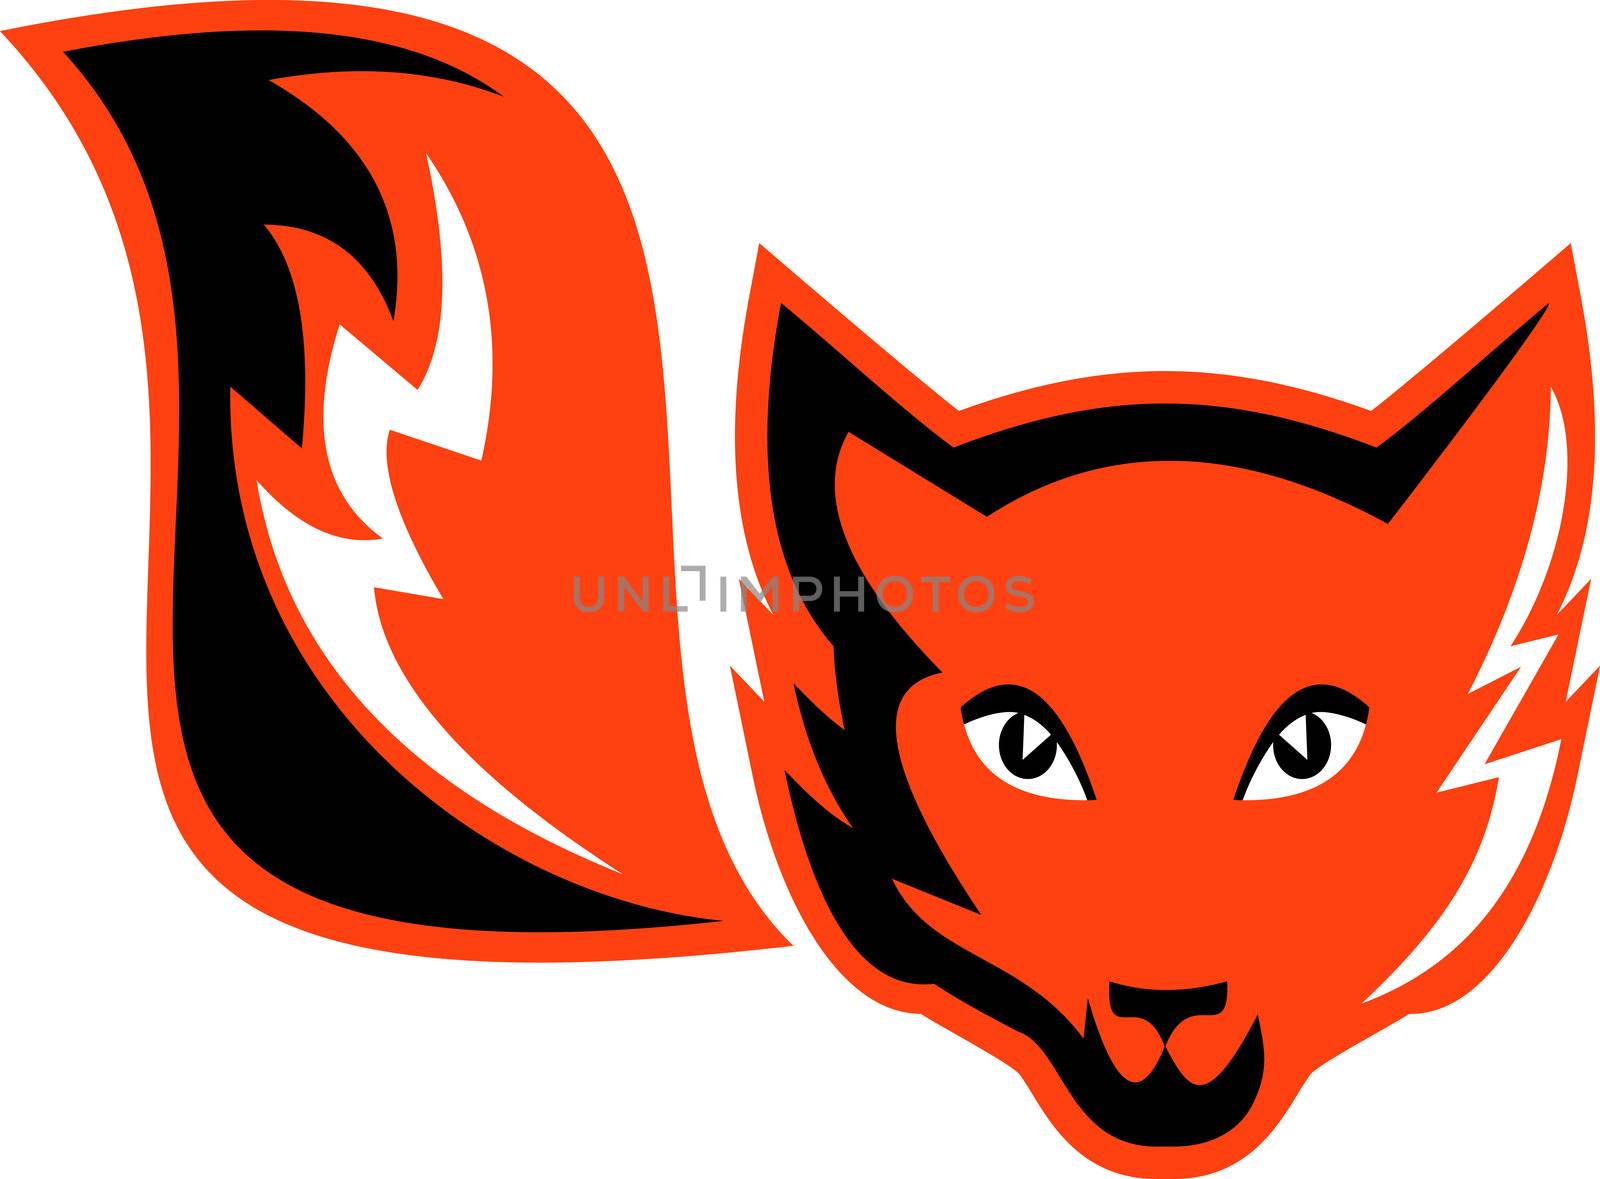 Imagery shows a red fox with tail done in two (2) colors.